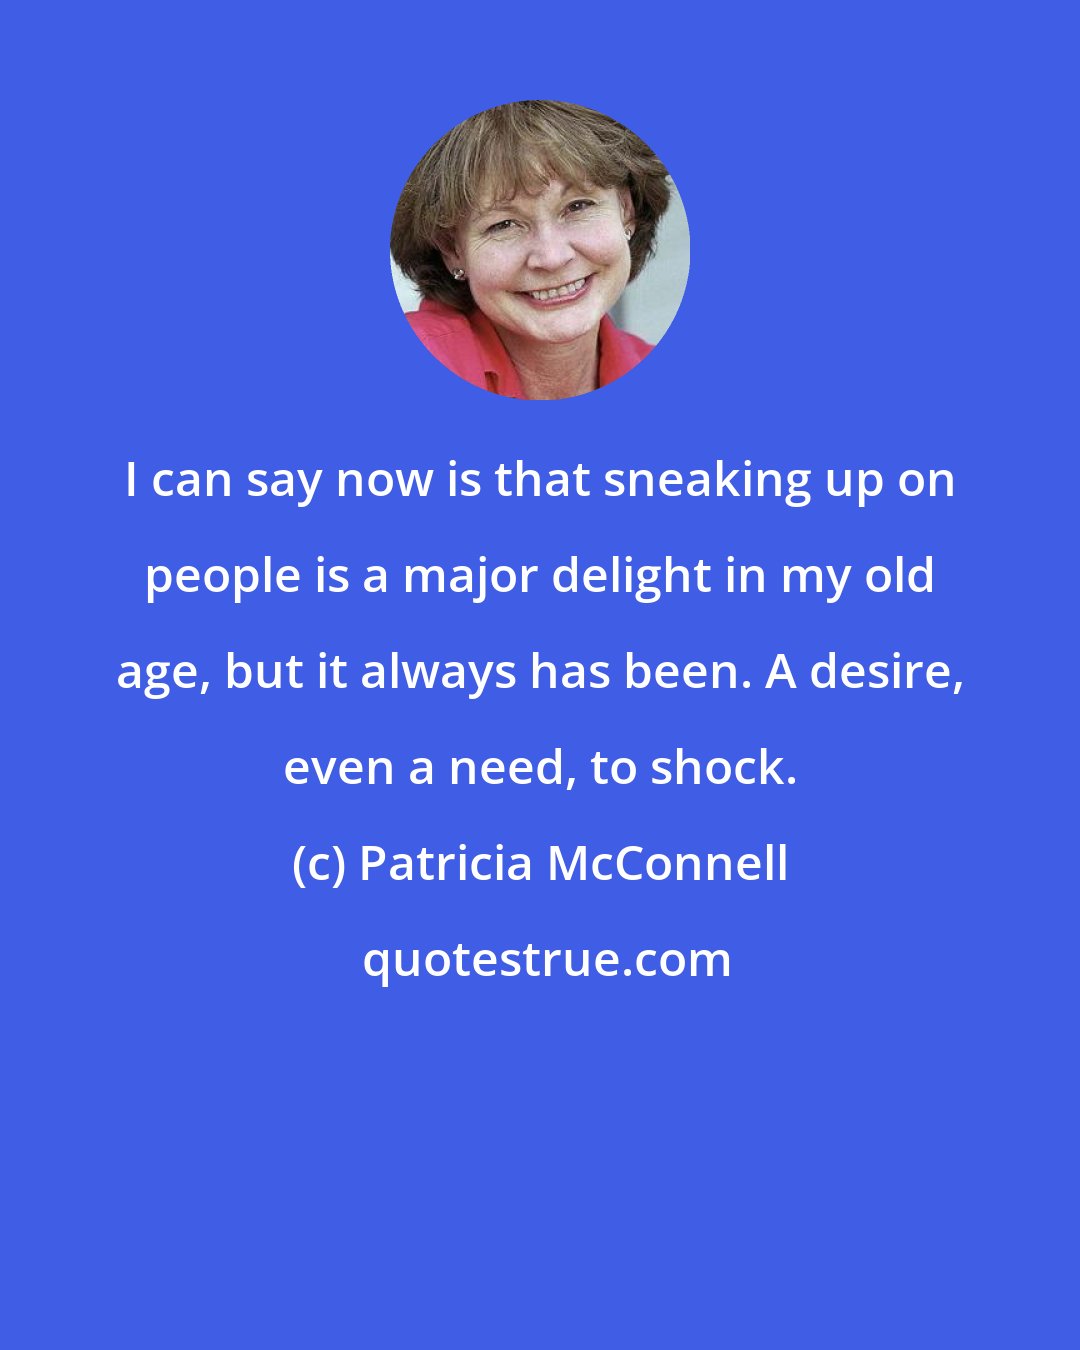 Patricia McConnell: I can say now is that sneaking up on people is a major delight in my old age, but it always has been. A desire, even a need, to shock.